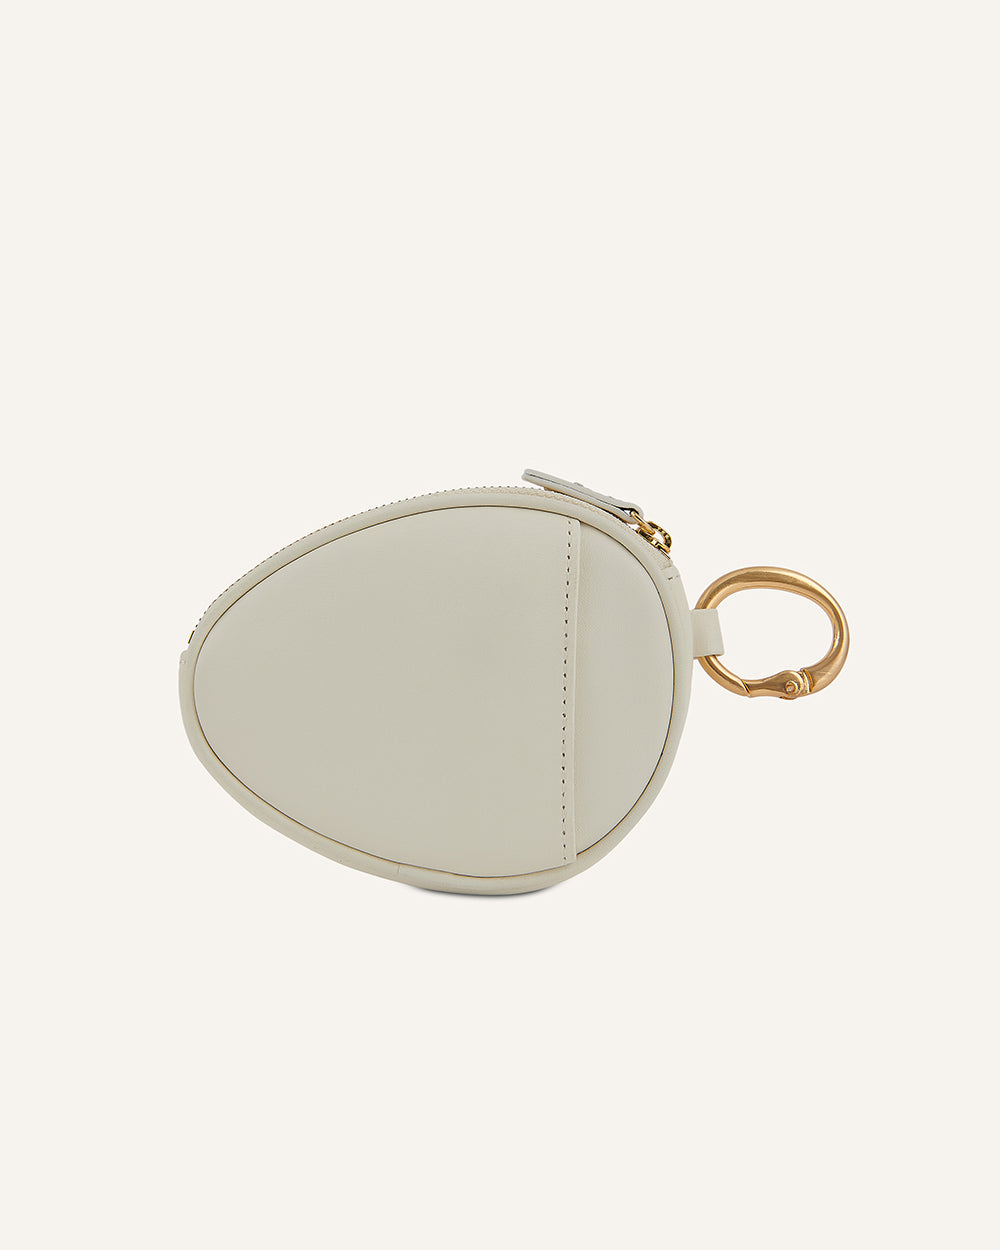 Oval Coin Purse Beige